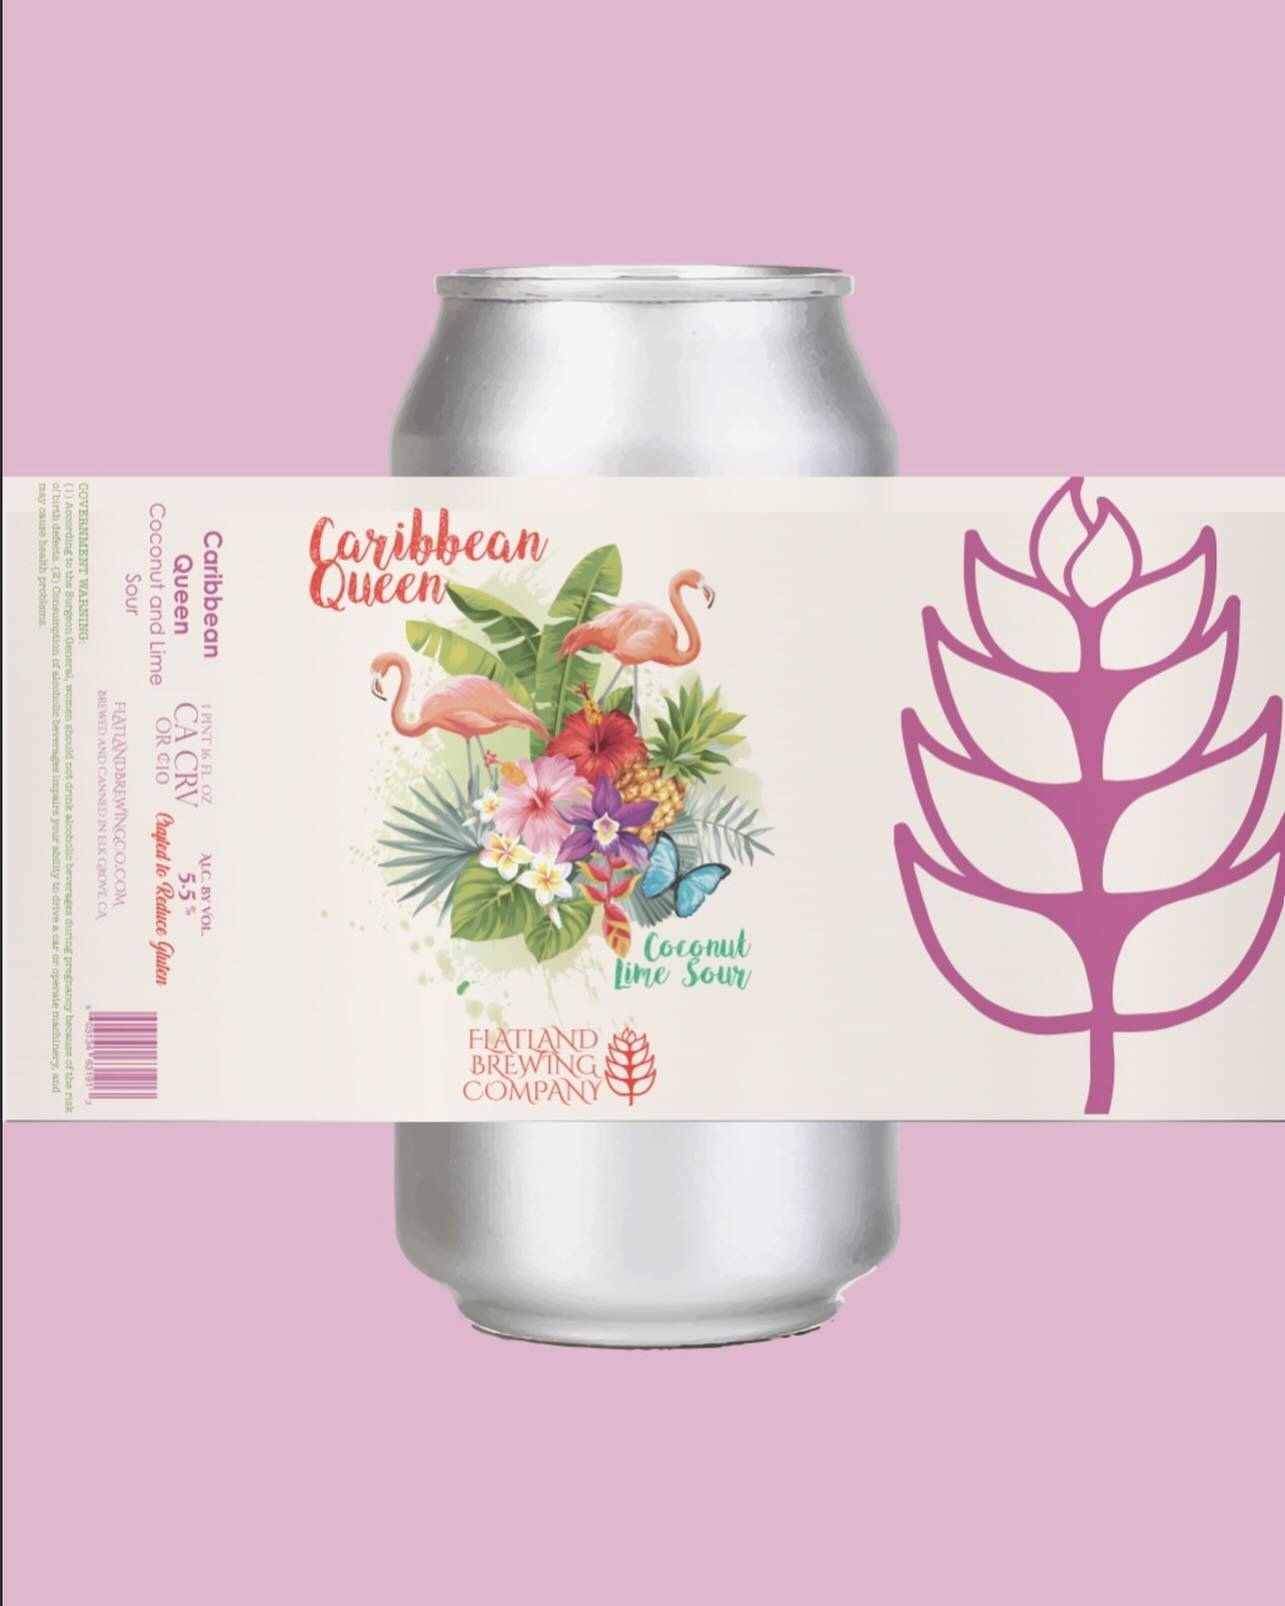 Can #4, tomorrow 3pm. 

🎶Caribbean Queen
Now we&rsquo;re sharing the same dream And our hearts they beat as one
No more love on the run🎶

Introducing &ldquo;Caribbean Queen&rdquo; - Fruited Sour (5.5%) w/ Coconut &amp; Lime. 🌺🌴🍹🐠🍍🦜

👉 Catch 